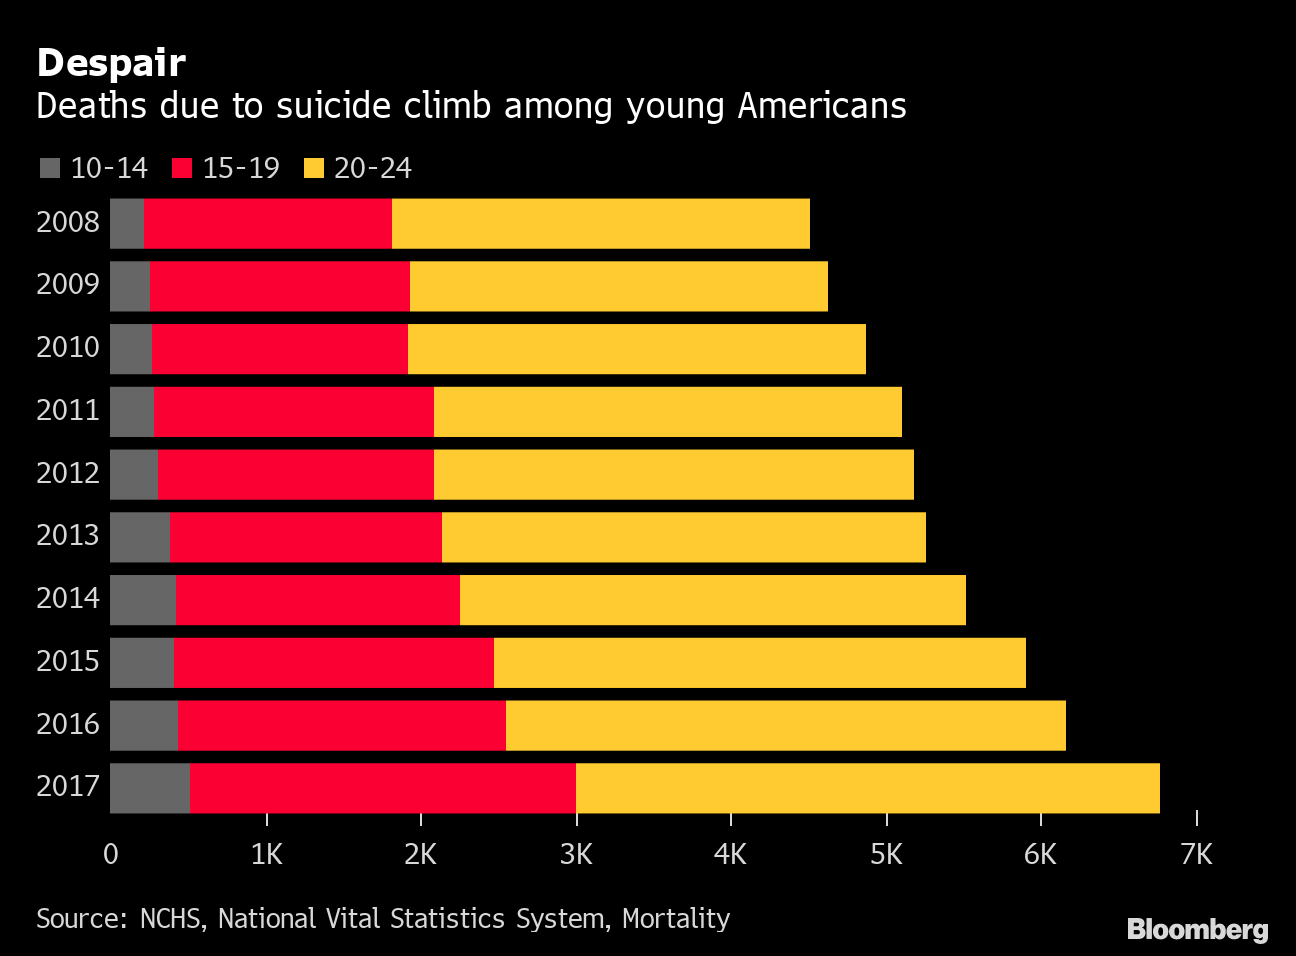 Suicide Rates for U.S. Teens and Young Adults on the Rise Bloomberg